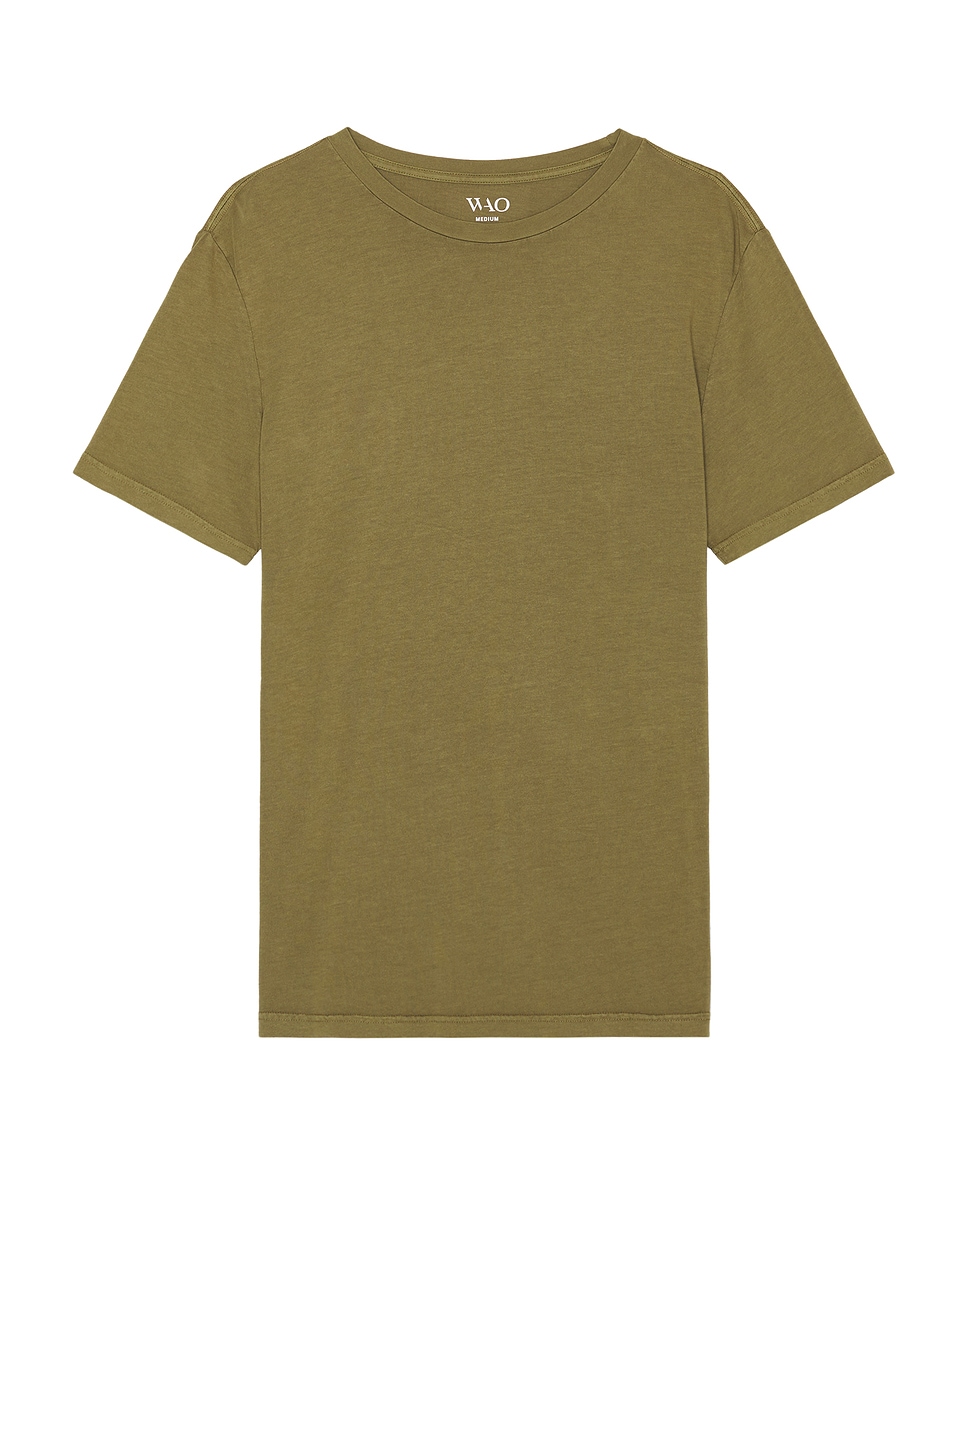 Image 1 of WAO The Standard Tee in olive